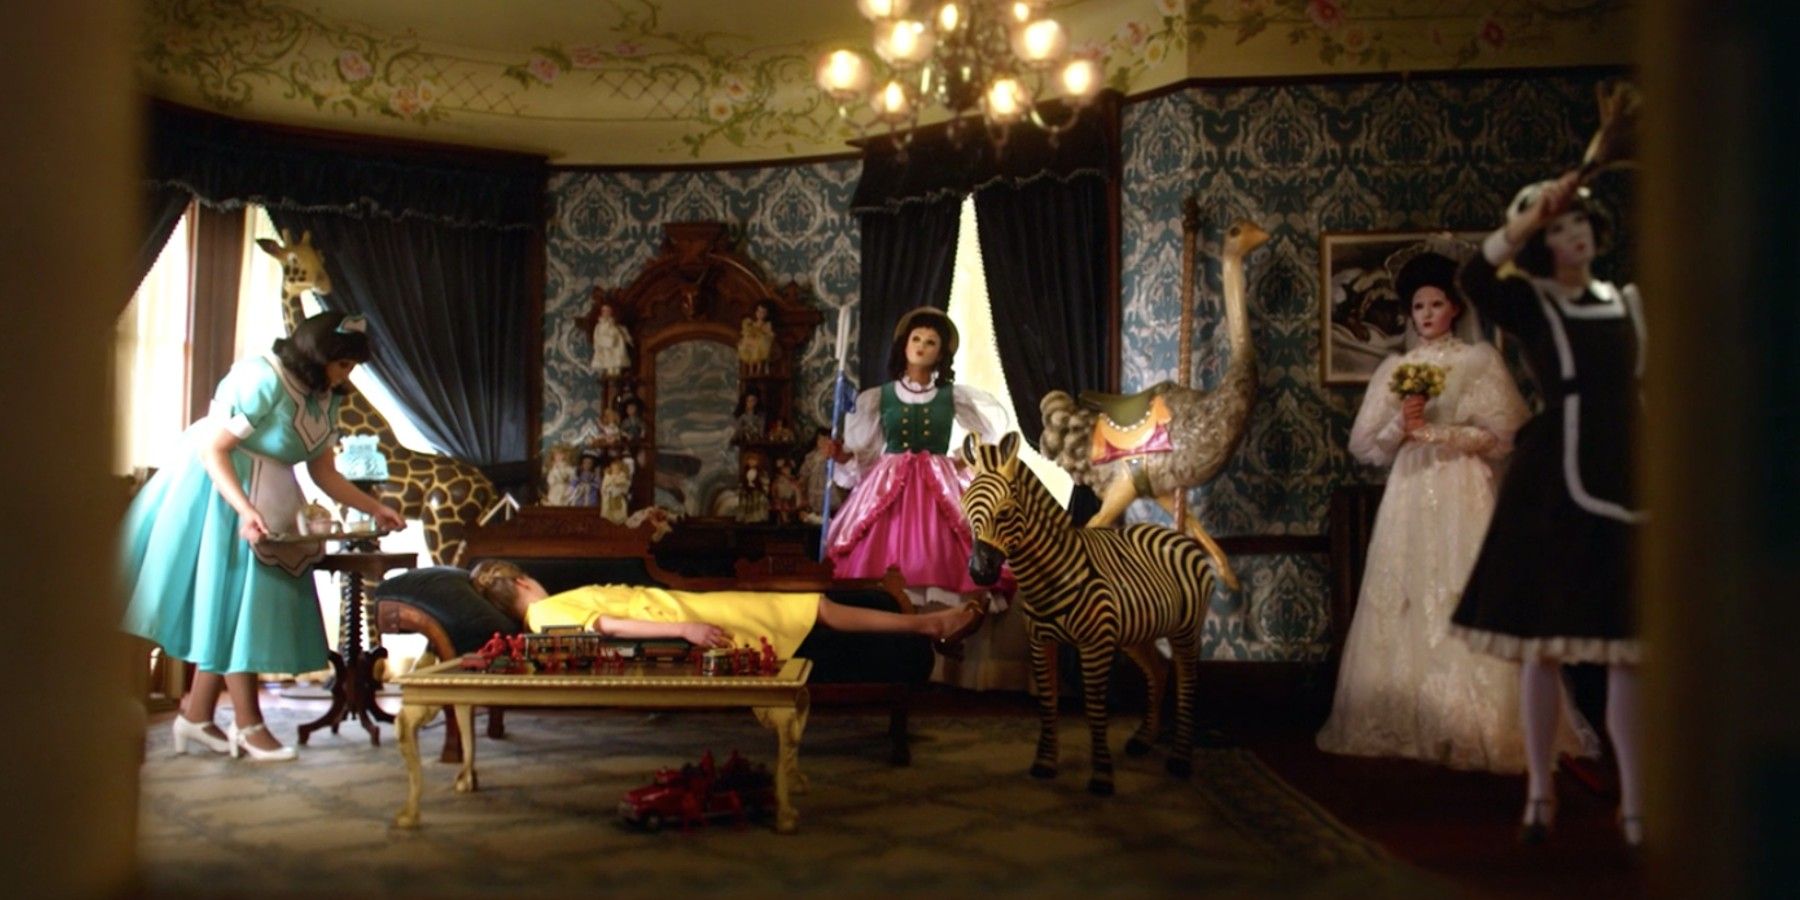 Dollhouse transition sequence in American Horror Stories Season 2 Episode 1